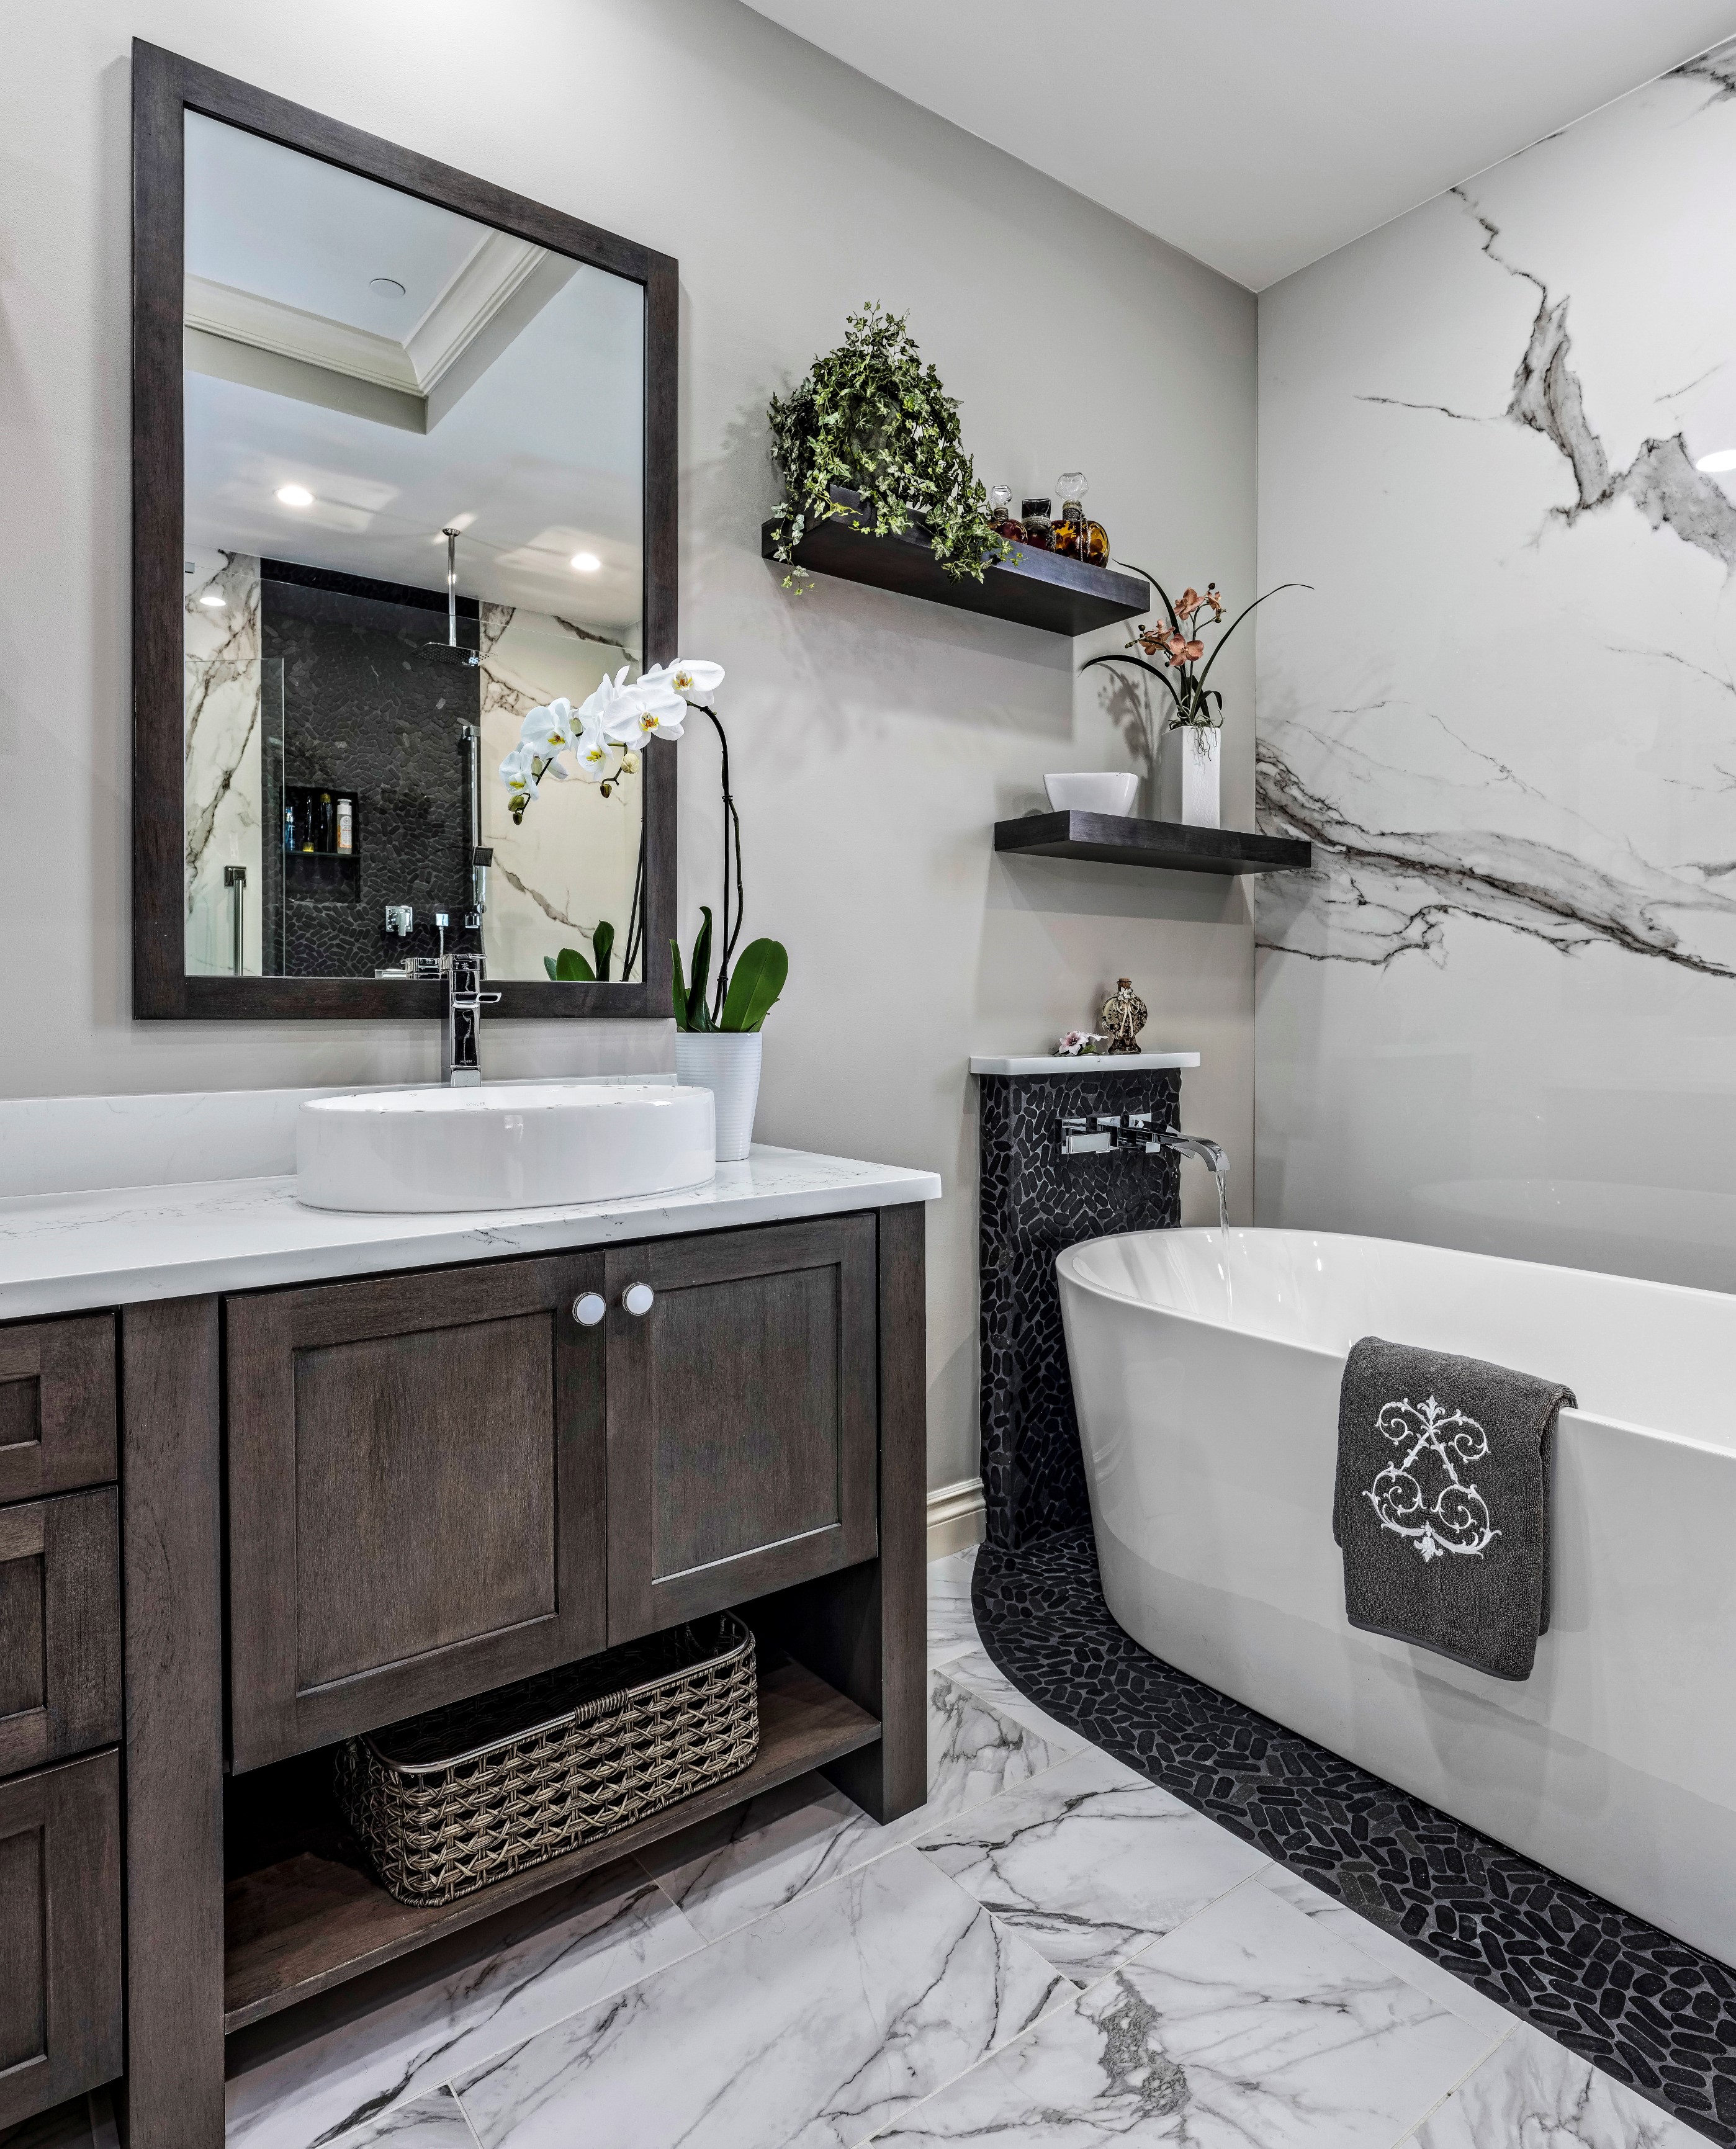 Bathroom Remodeling Typically Cost, How Much Does It Cost To Redo A Full Bathroom